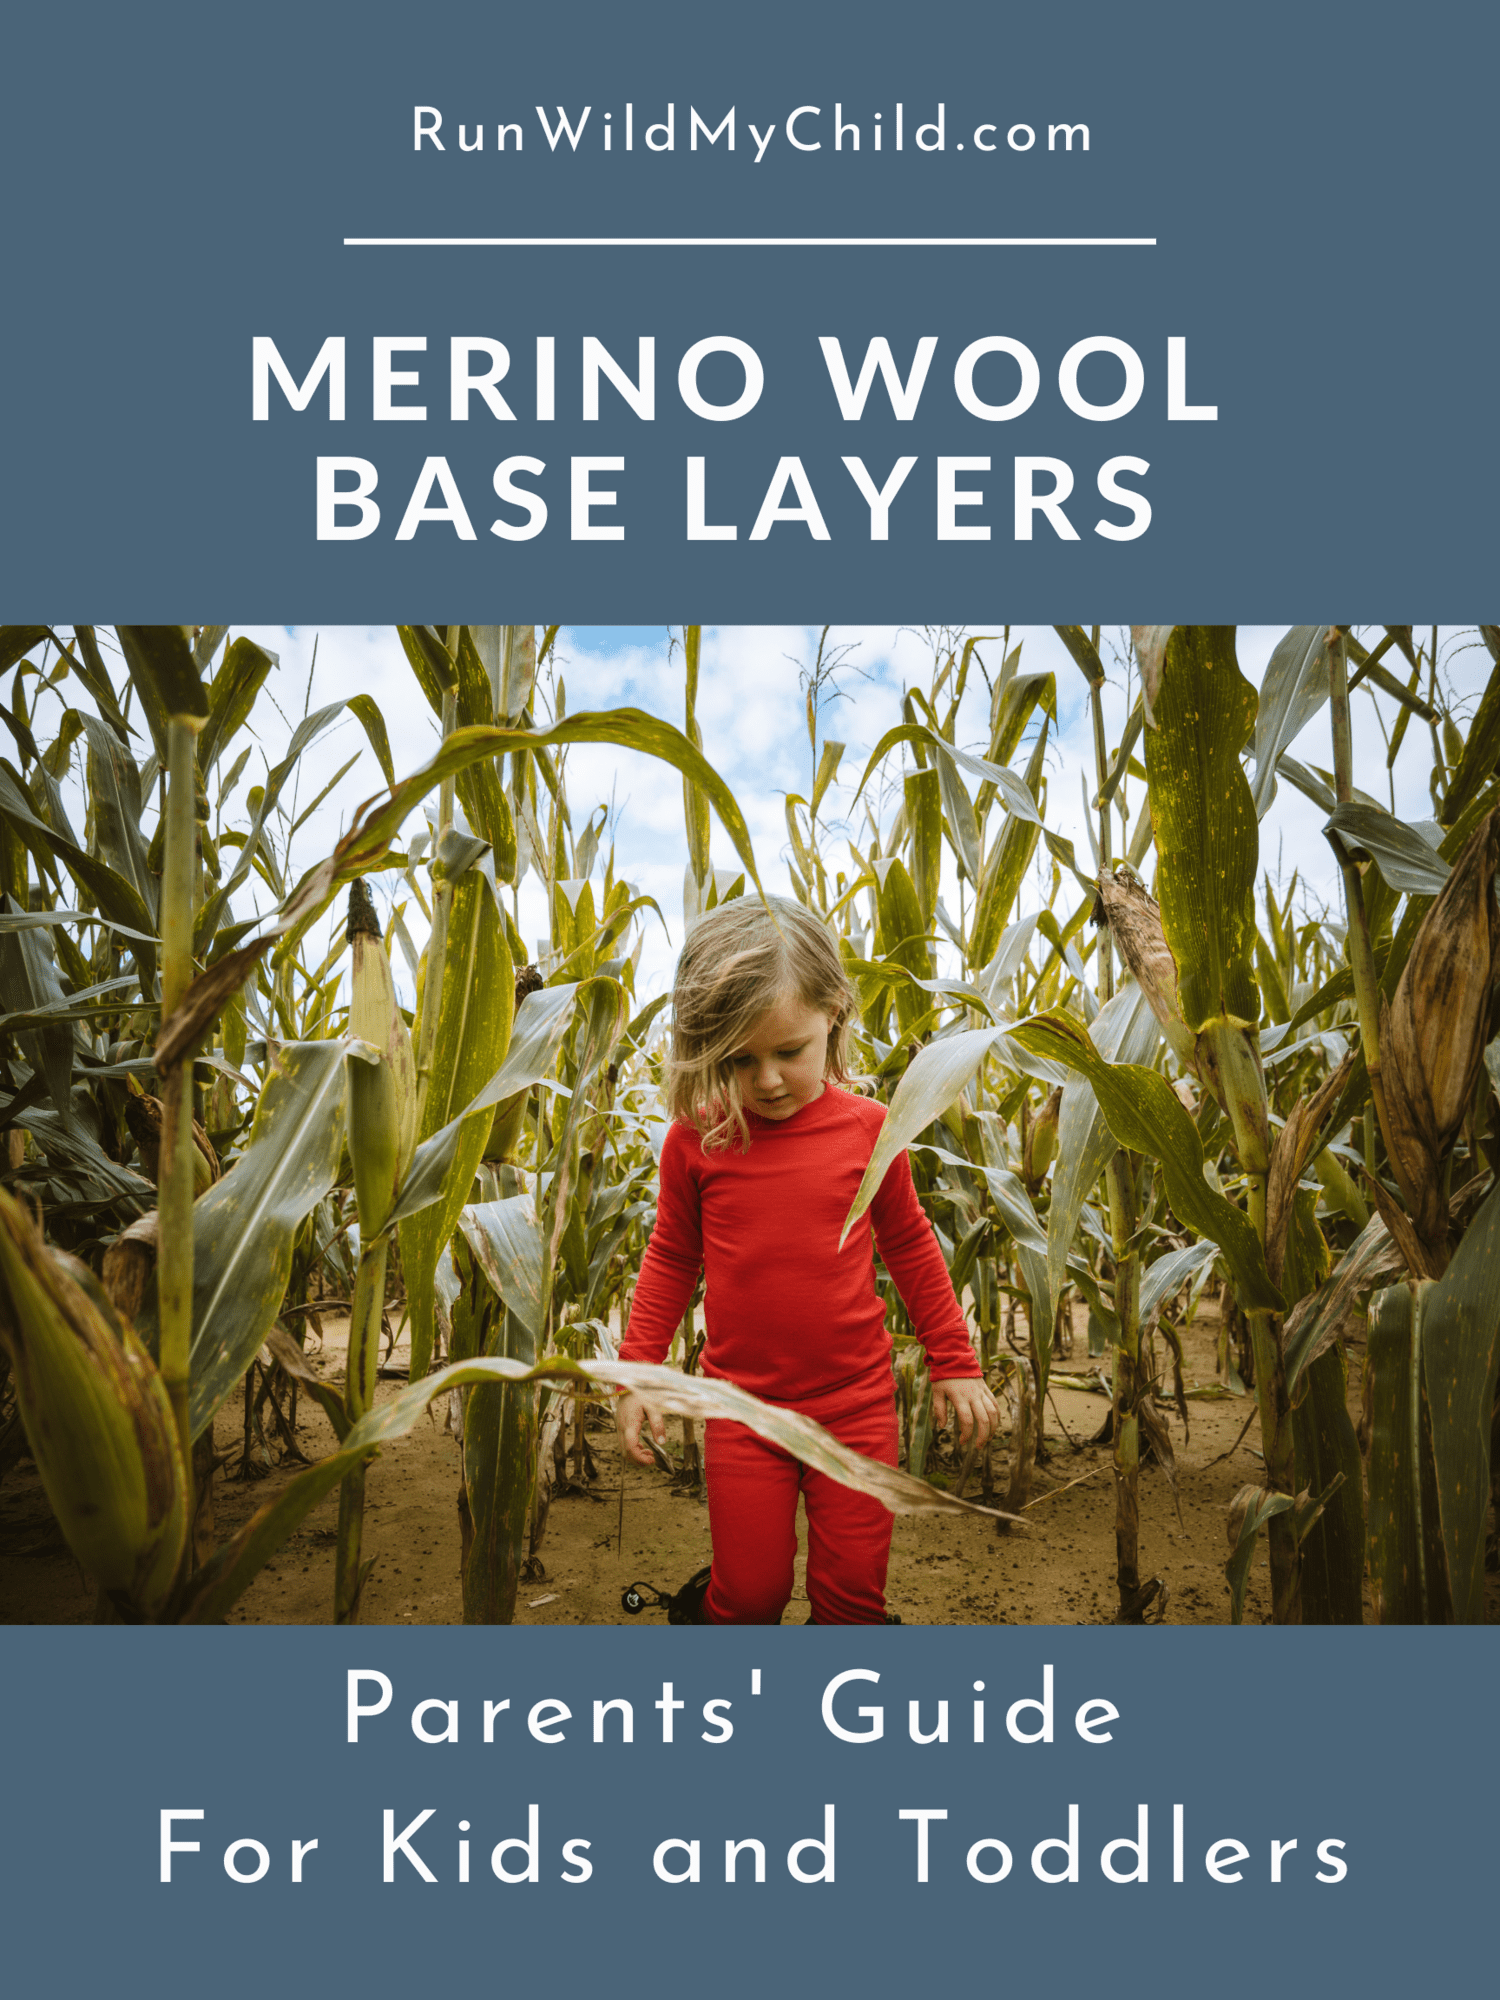 Guide to Merino Wool Base Layers for Kids - the best wool base layers for kids